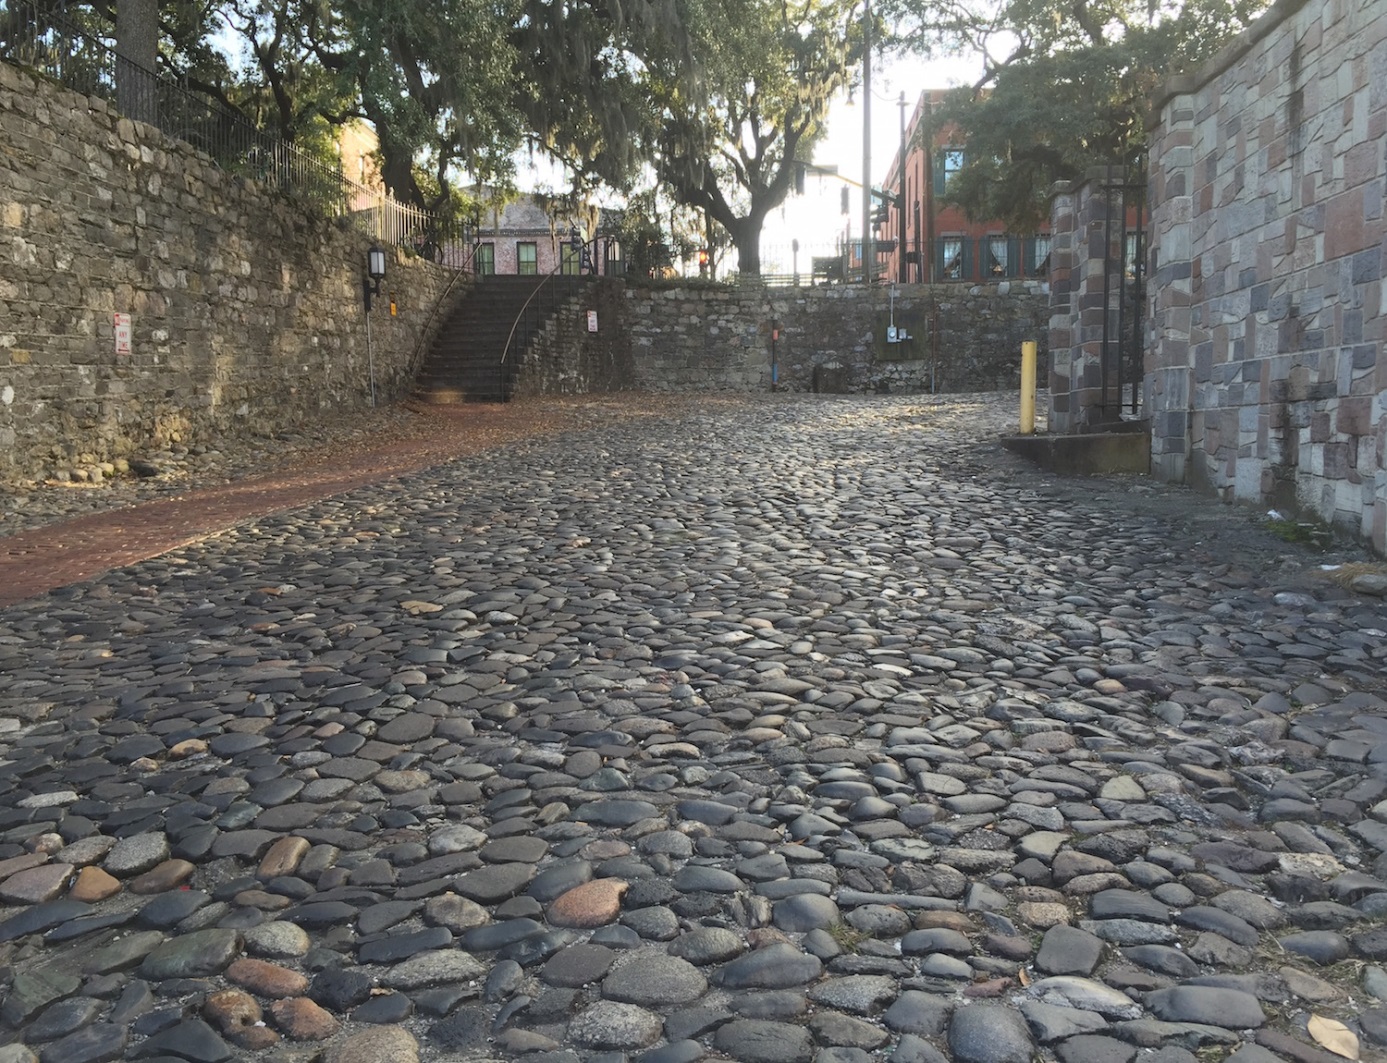 Cobblestone streets and buildings are now iconic sights in Savannah, Georgia. The stones served as ballast for ships travelling from Liverpool to the southern USA as part of the tobacco and cotton trades. Photograph: Anthony Martin. 